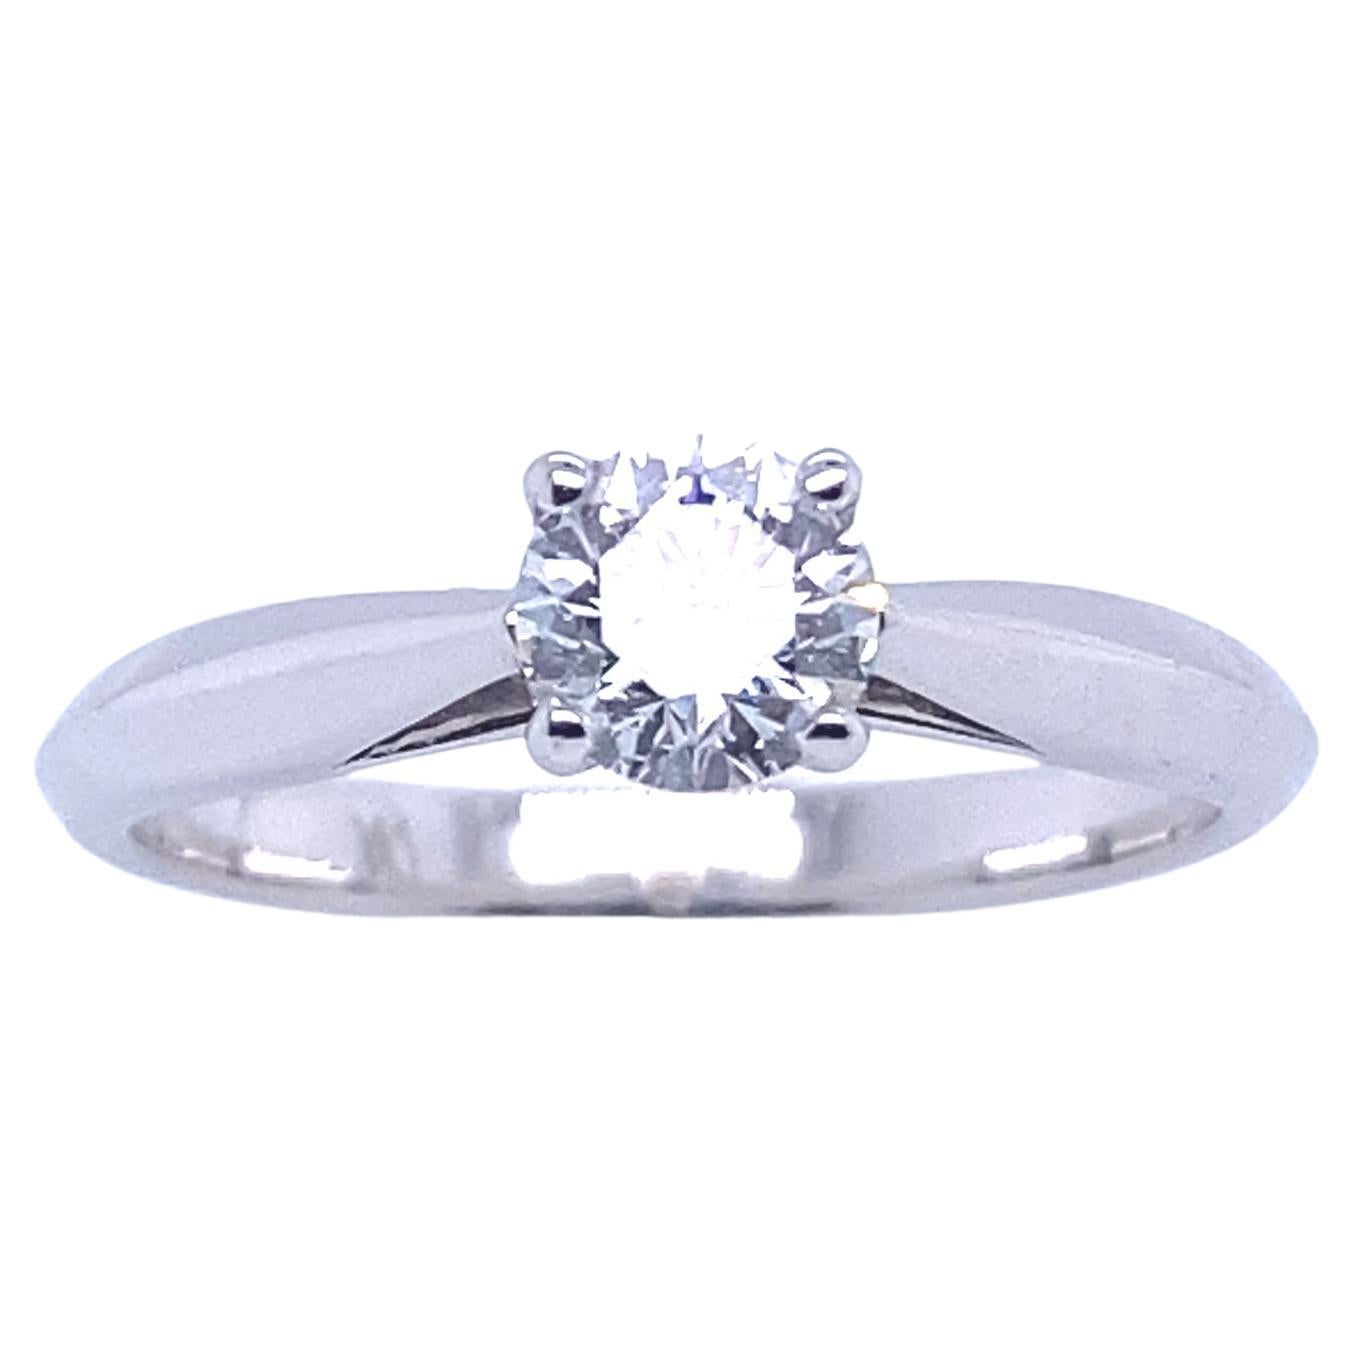 GIA Certified 0.56 Carat Diamond Ring White Gold
Superb Diamond of 0.56 carat certified by GIA. The diamond has a round brilliant cut, color F. Diamond's degrees of cut, symmetry and polish indicate the quality of craftsmanship that went into